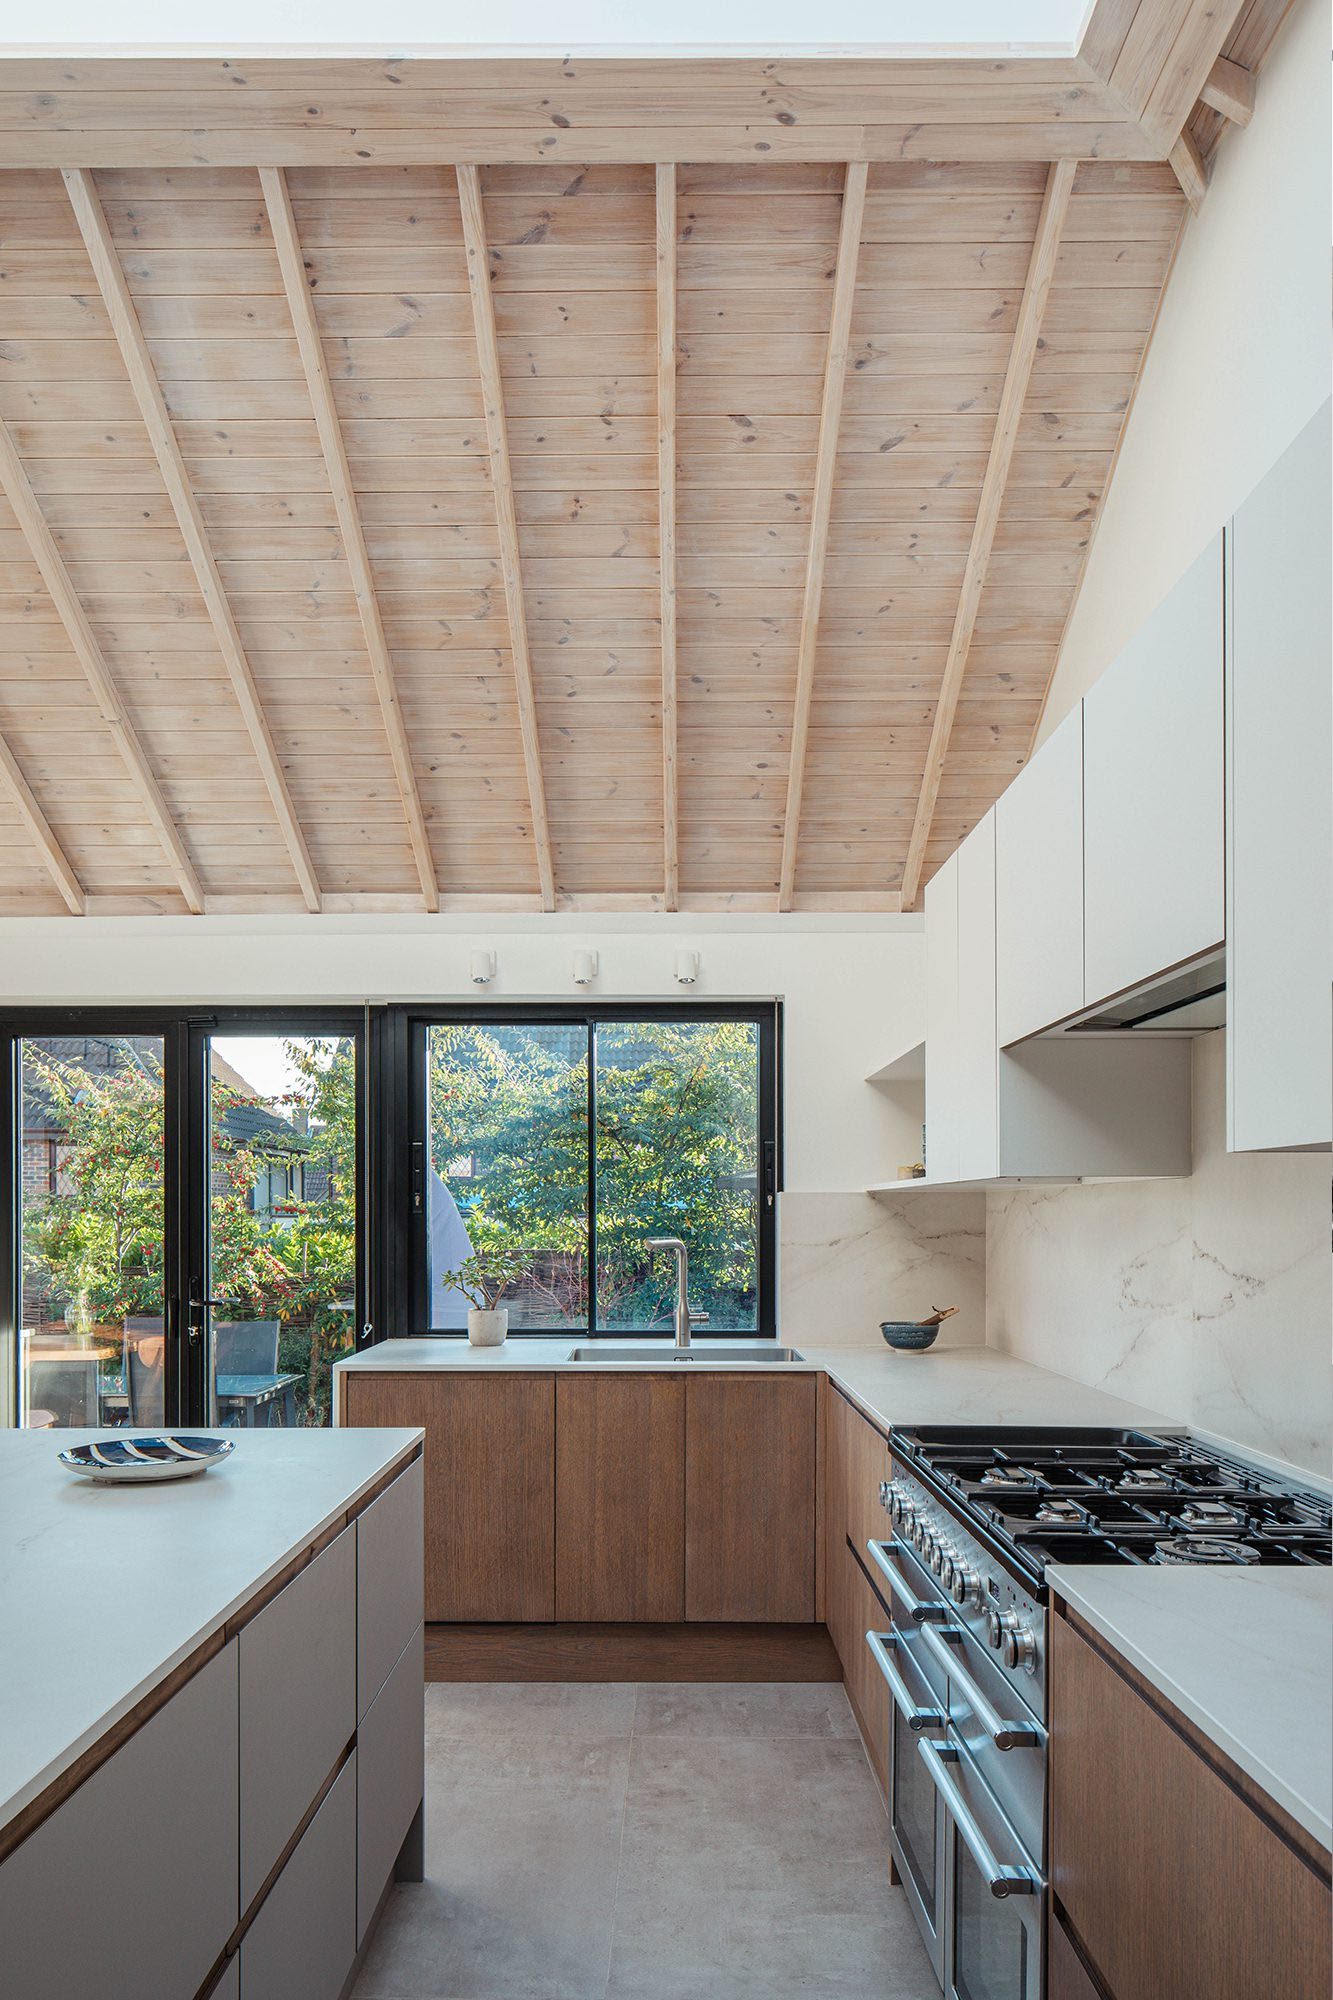 HUSK's Chisleurst Kitchen, featuring Oak on Plywood fronts with a bespoke wood stain.